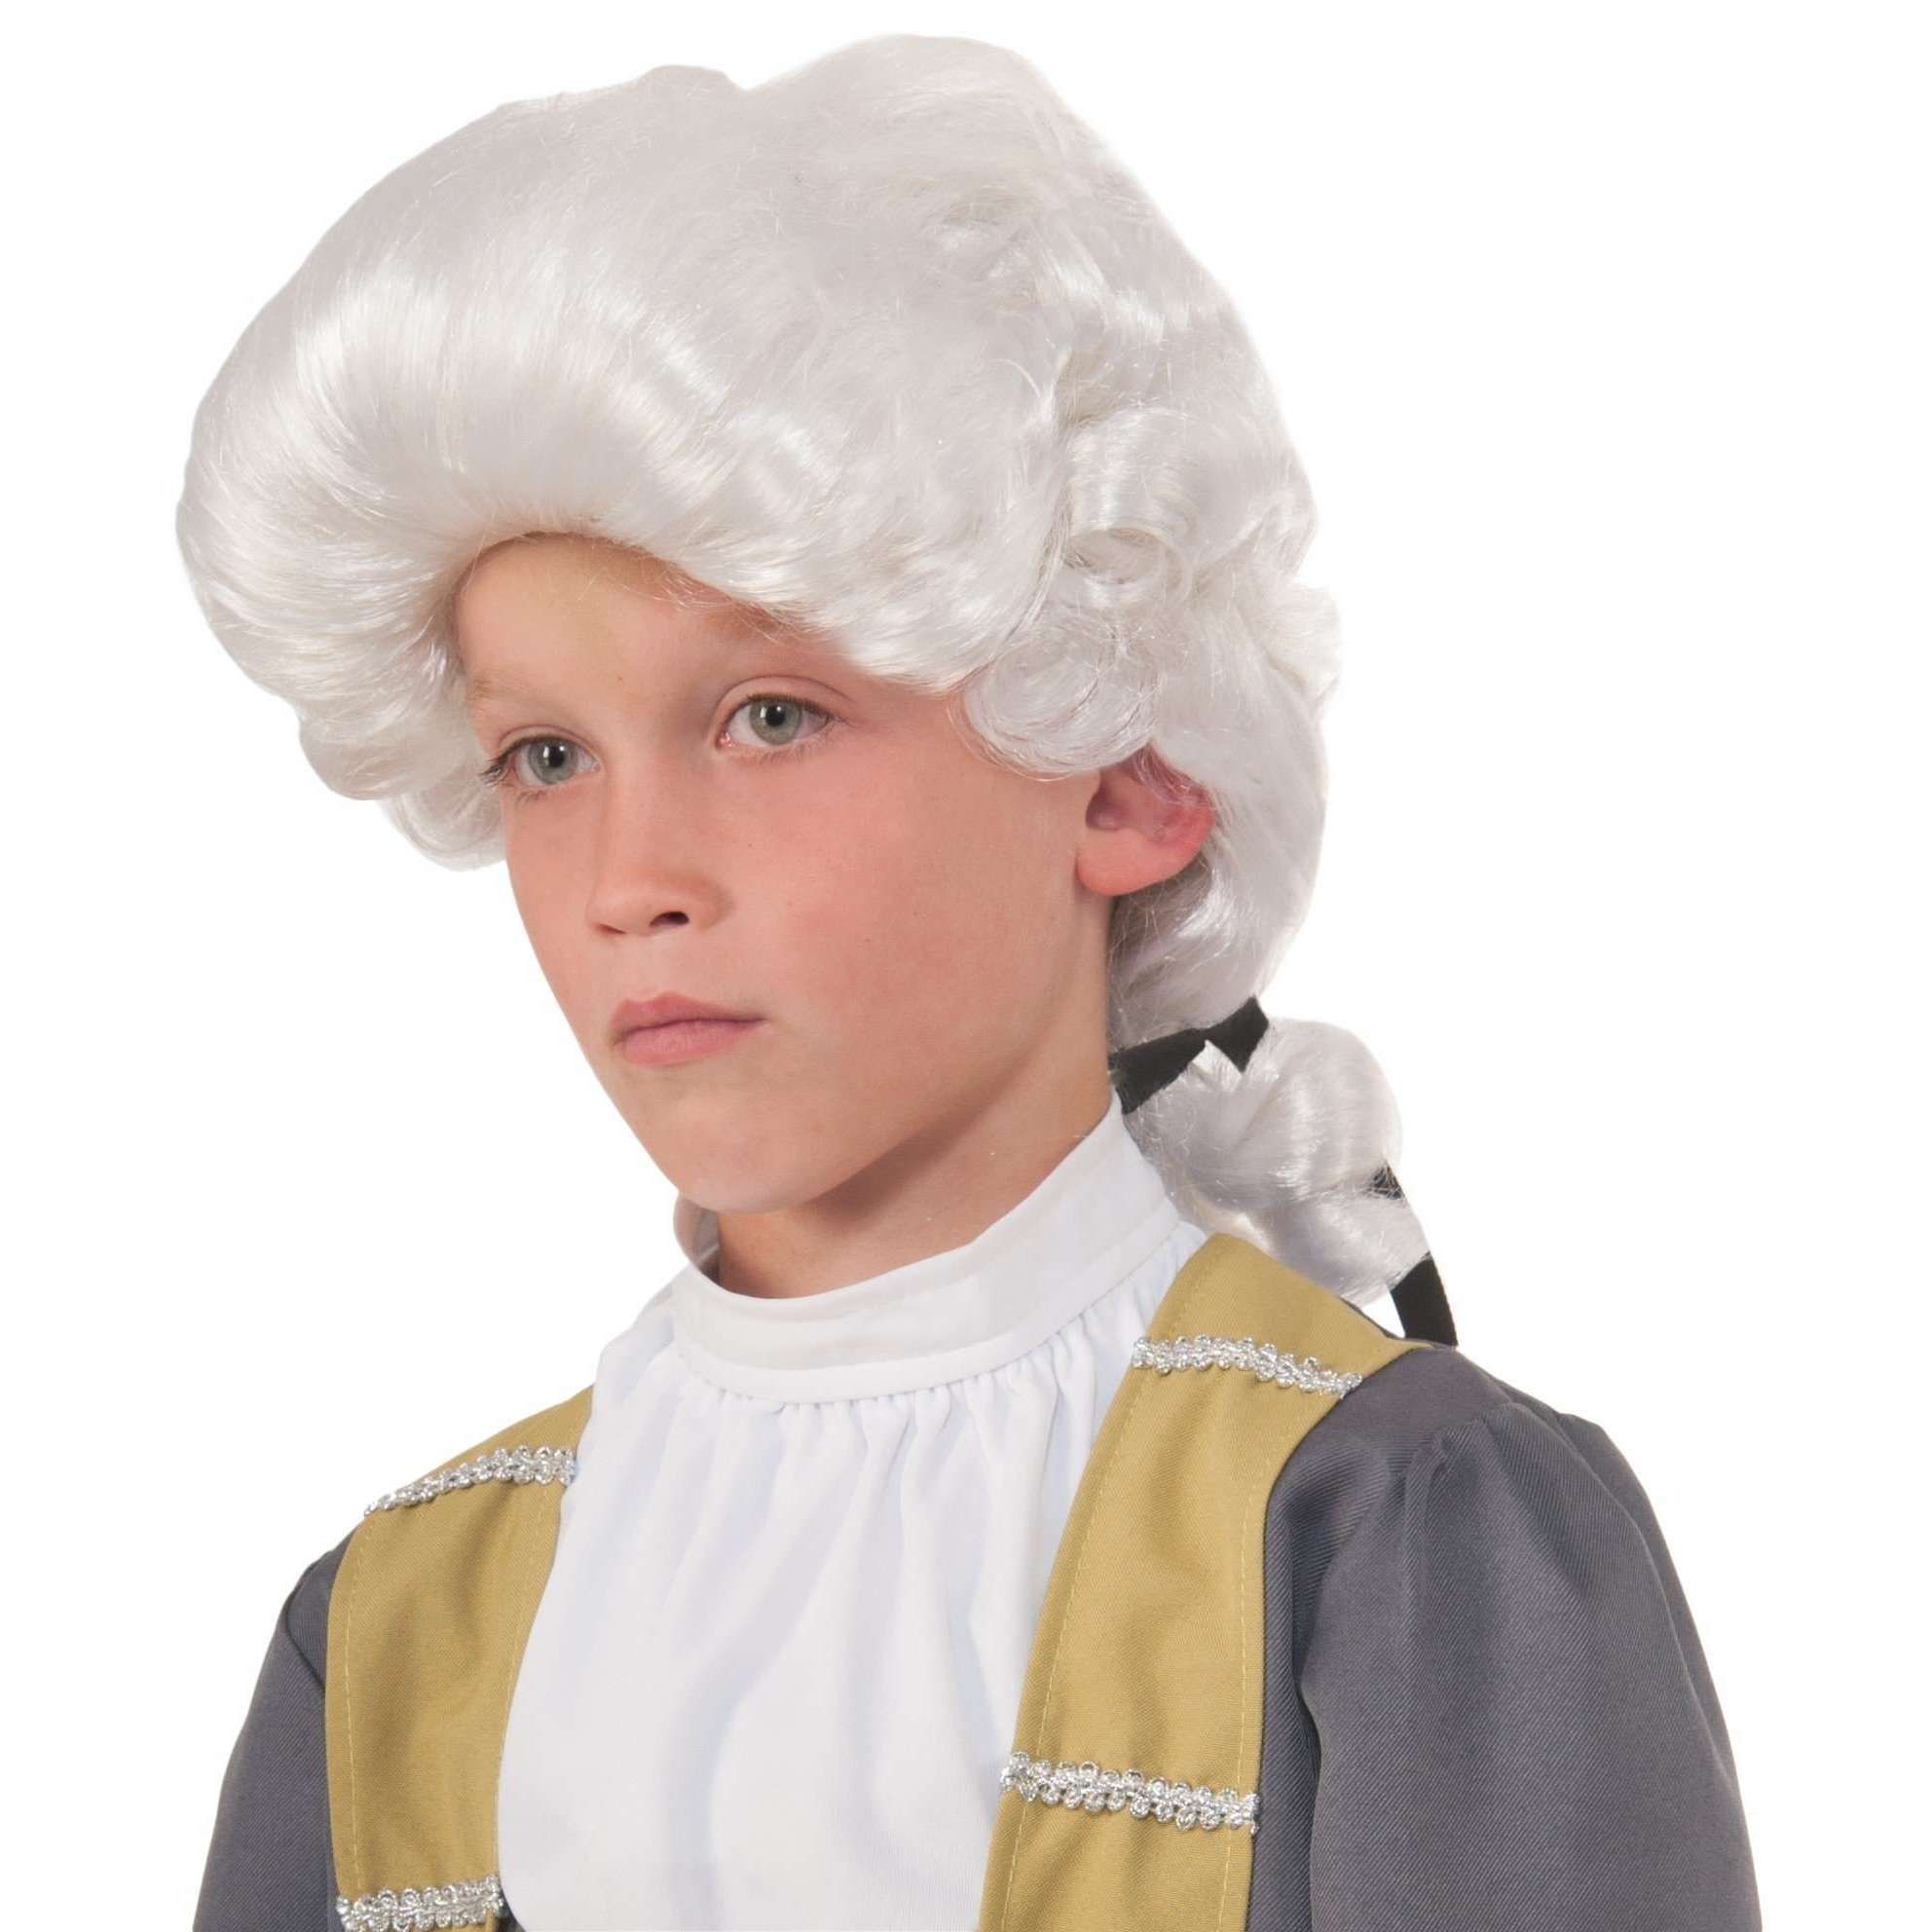 Deluxe White Colonial Wig for Child